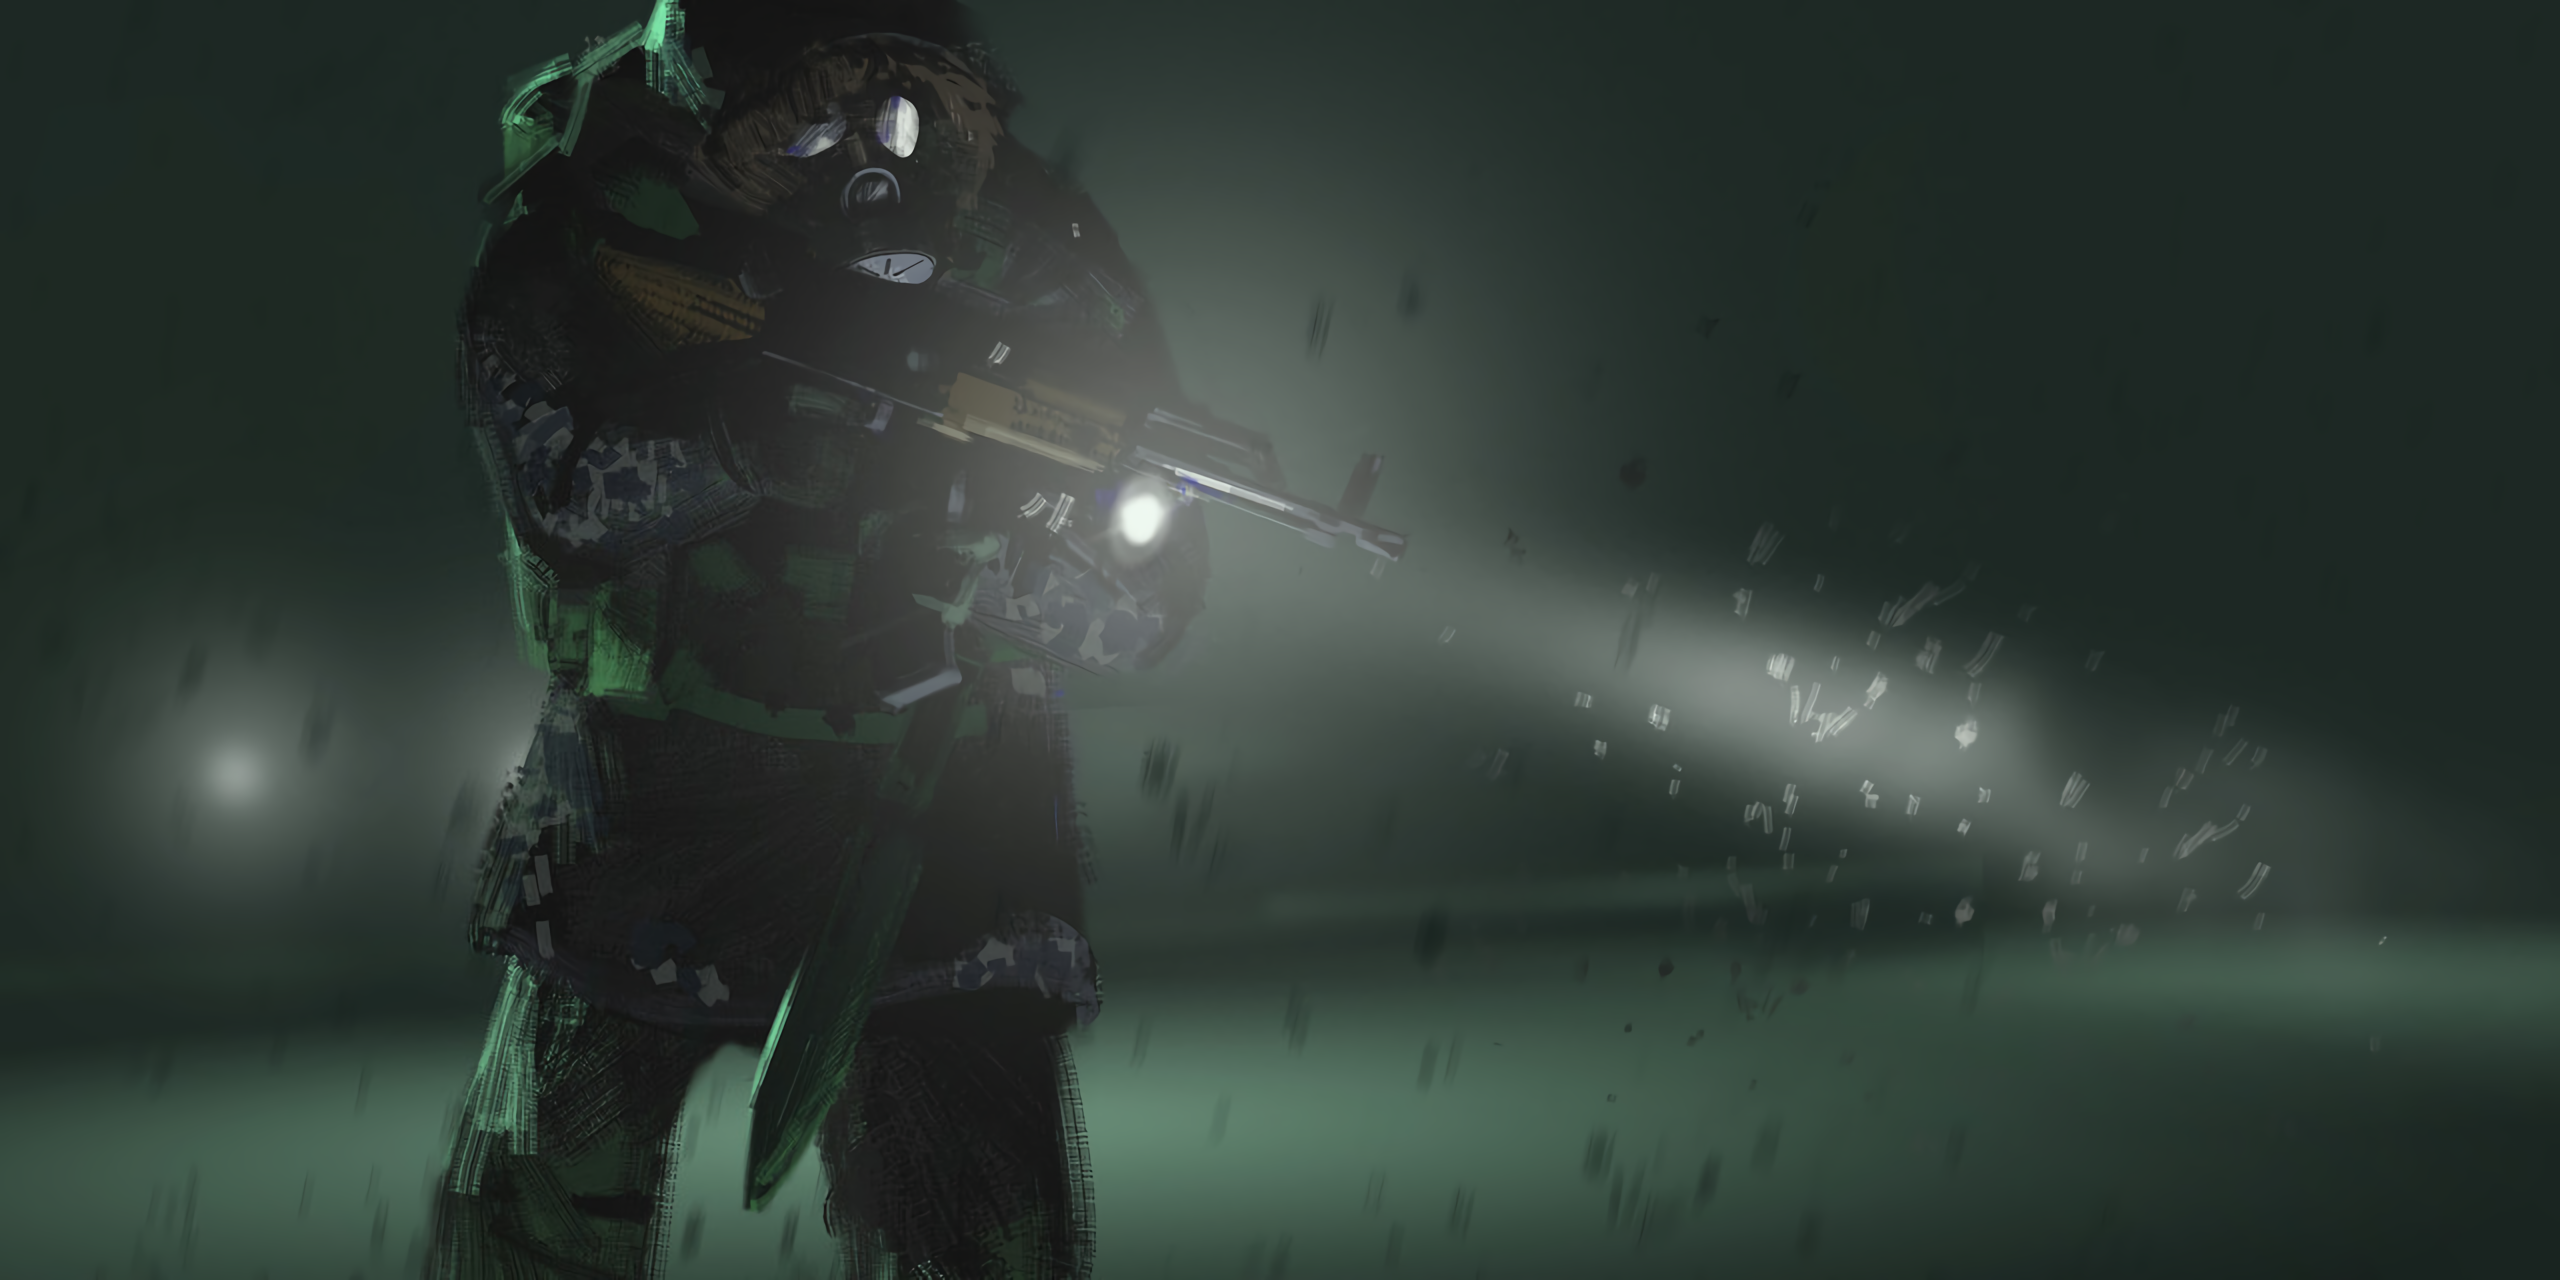 Arctic Weapon Snow Knife Gas Masks Lights Soldier Knives 2560x1280